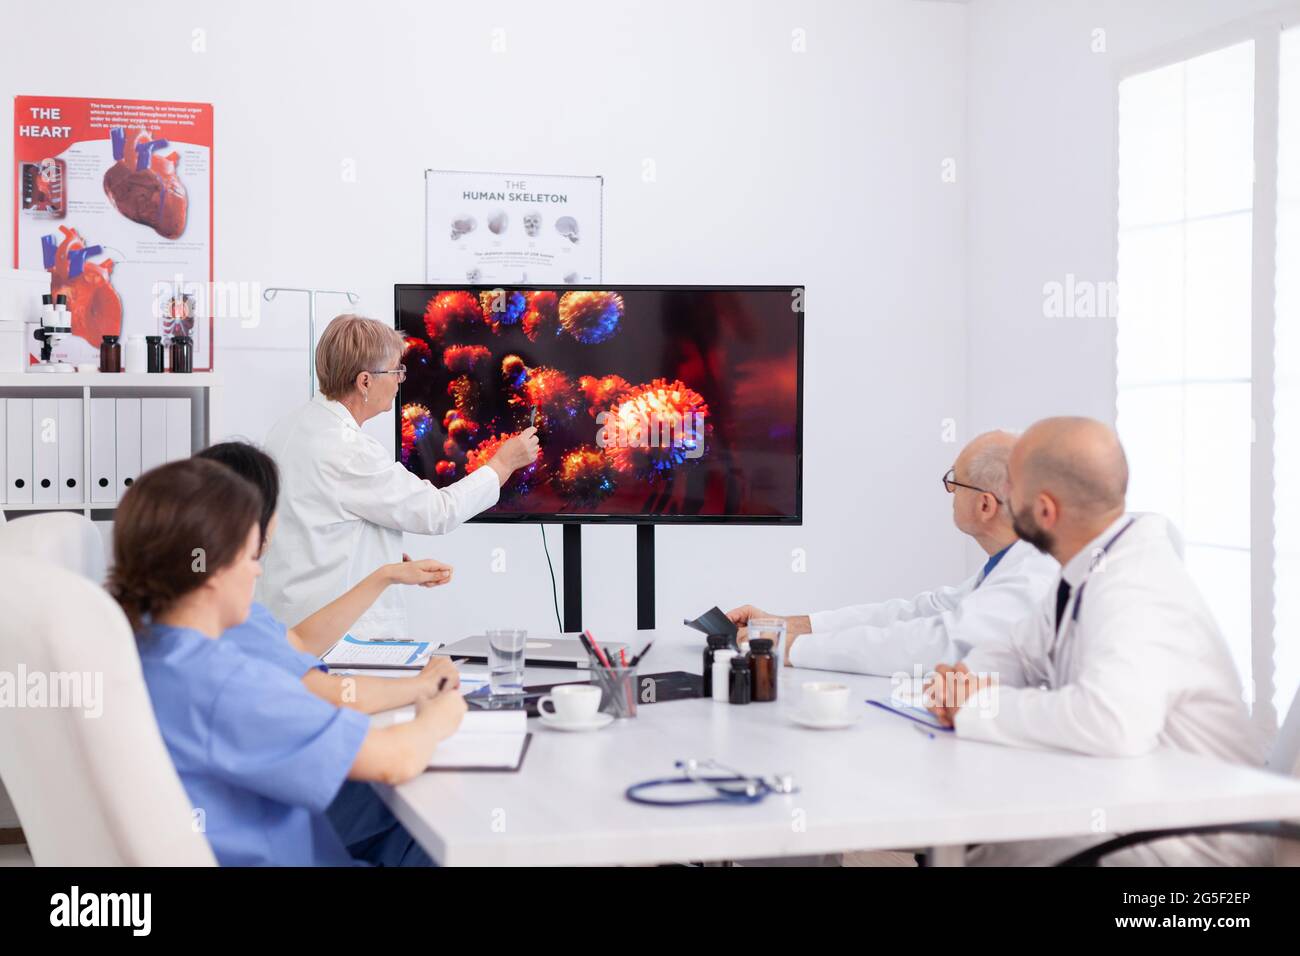 Senior practitioner doctor woman pointing virus sickness on monitor in hospital meeting room discussing with coworkers during brainstorming. Medical team of physicians planning vaccine against coronavirus Stock Photo